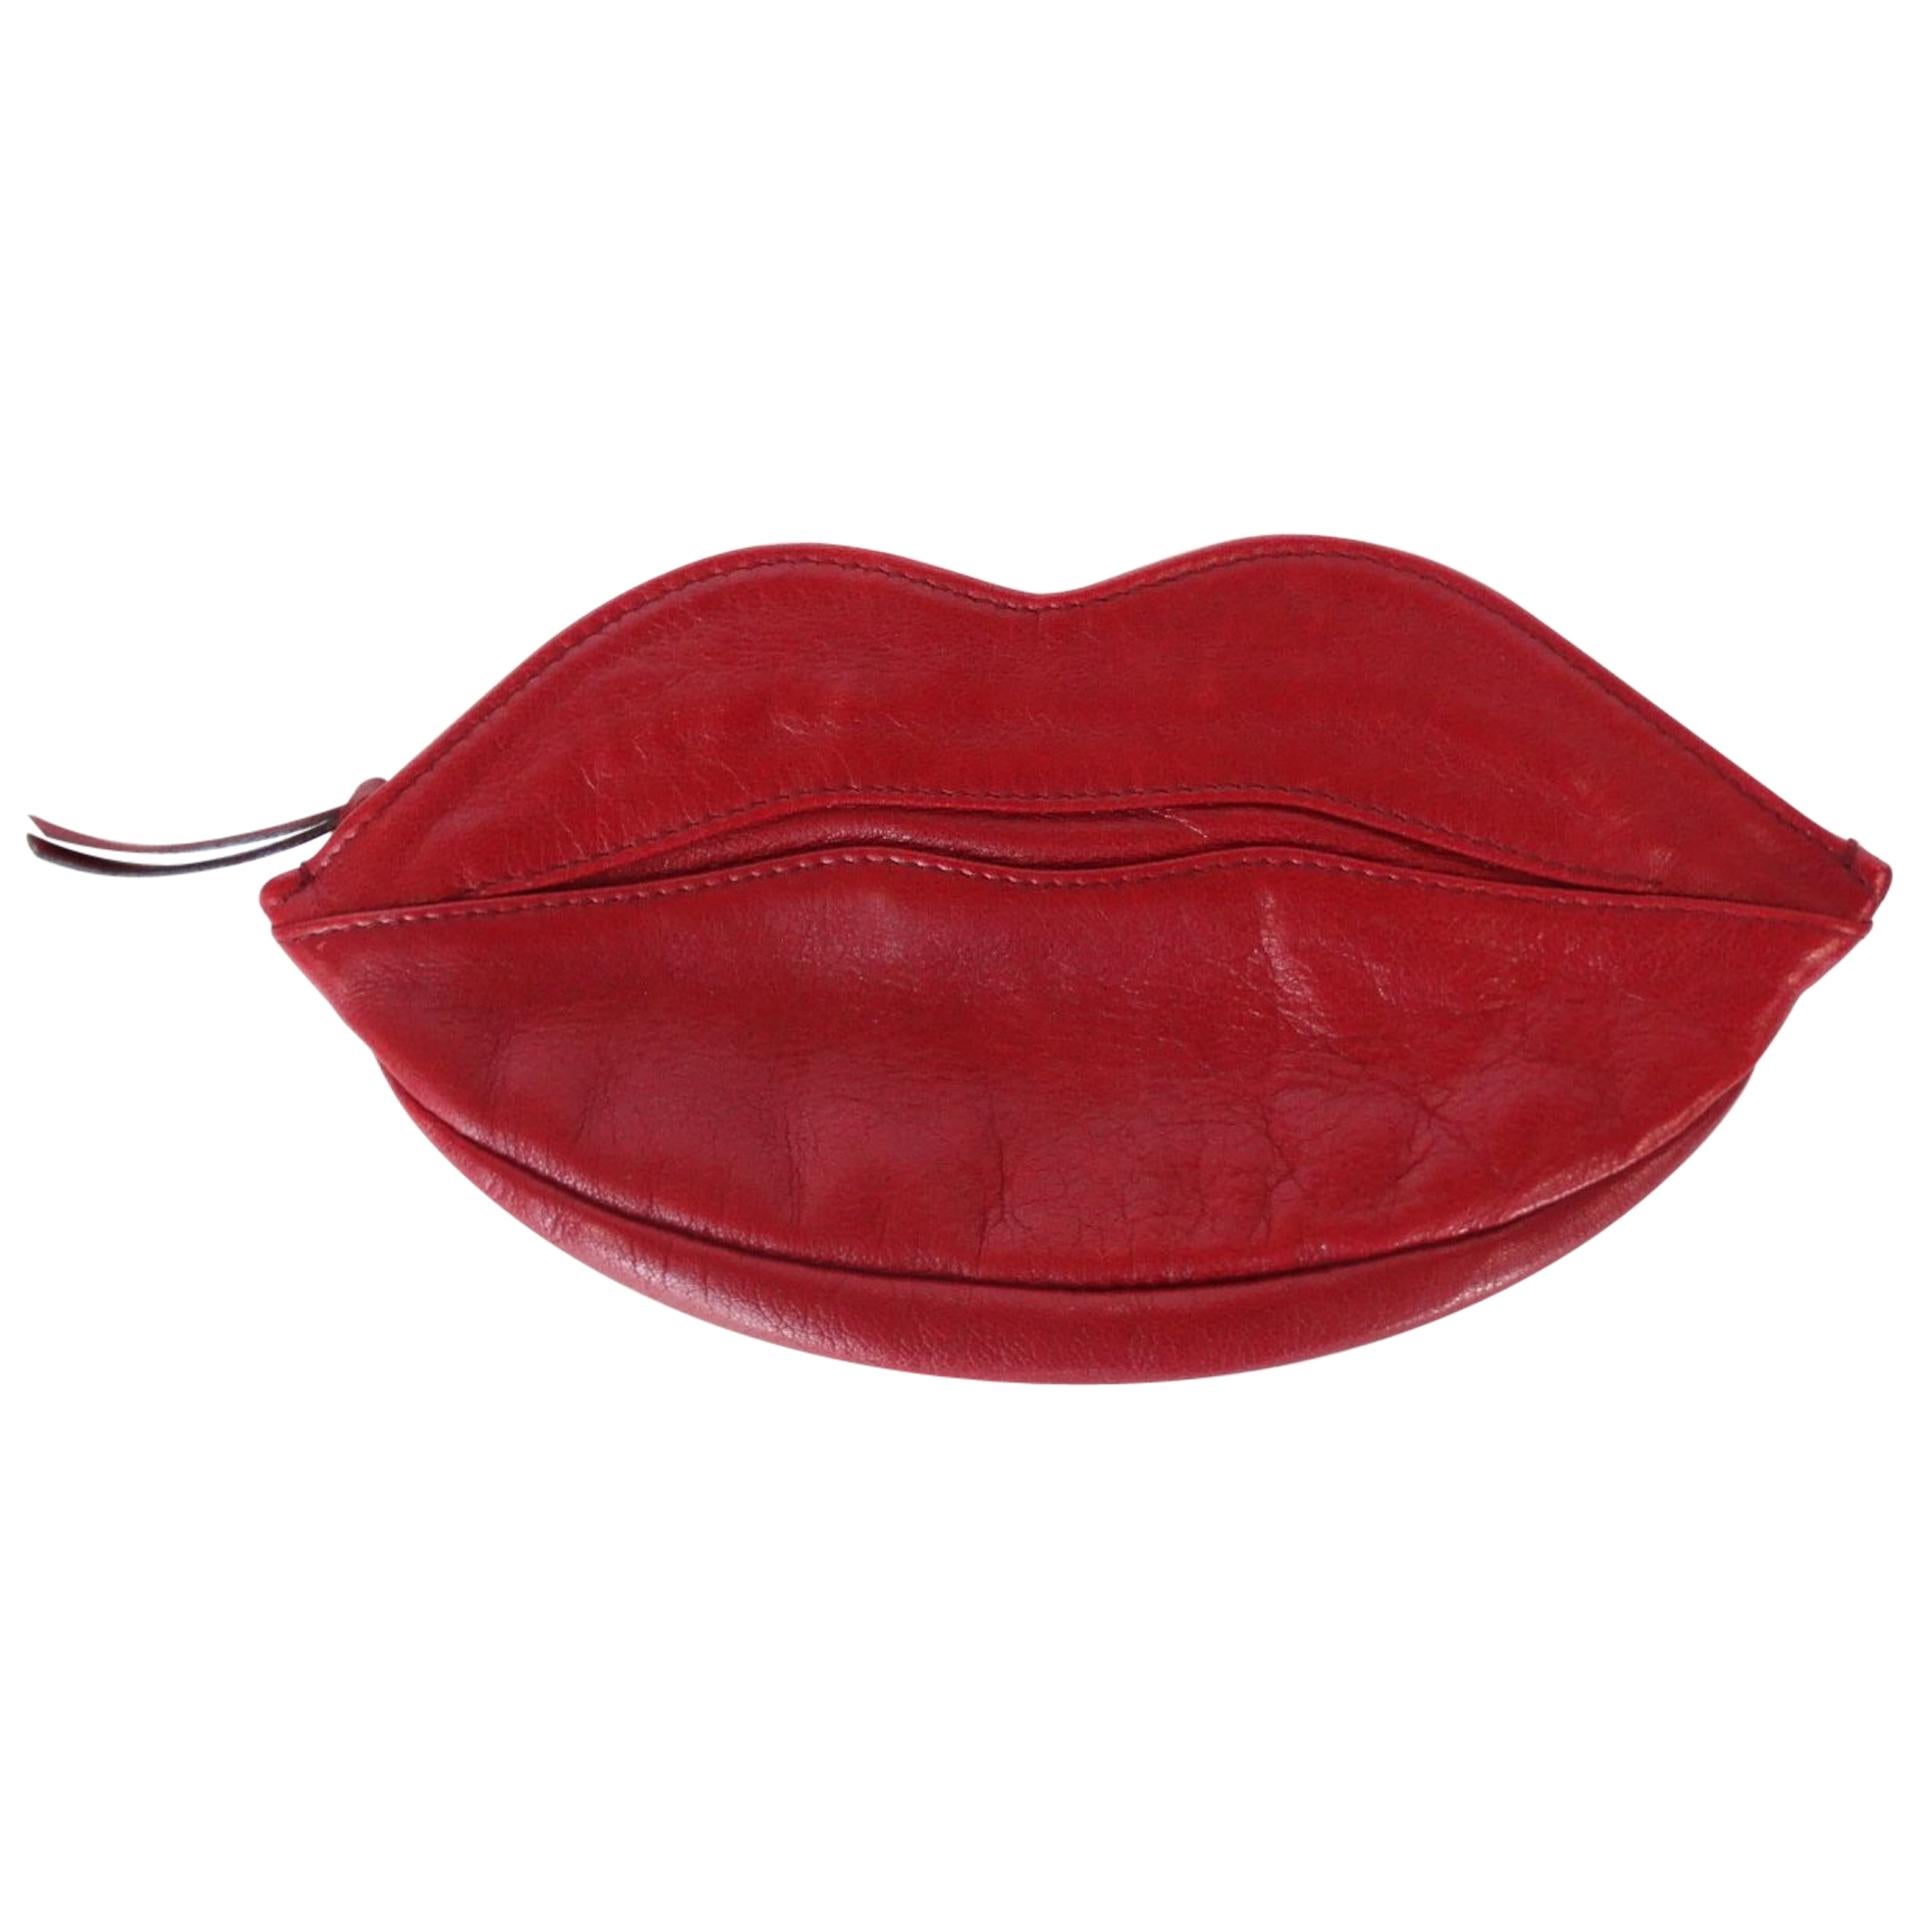 1990s Yves Saint Laurent lipstick Red Lips Pouch 